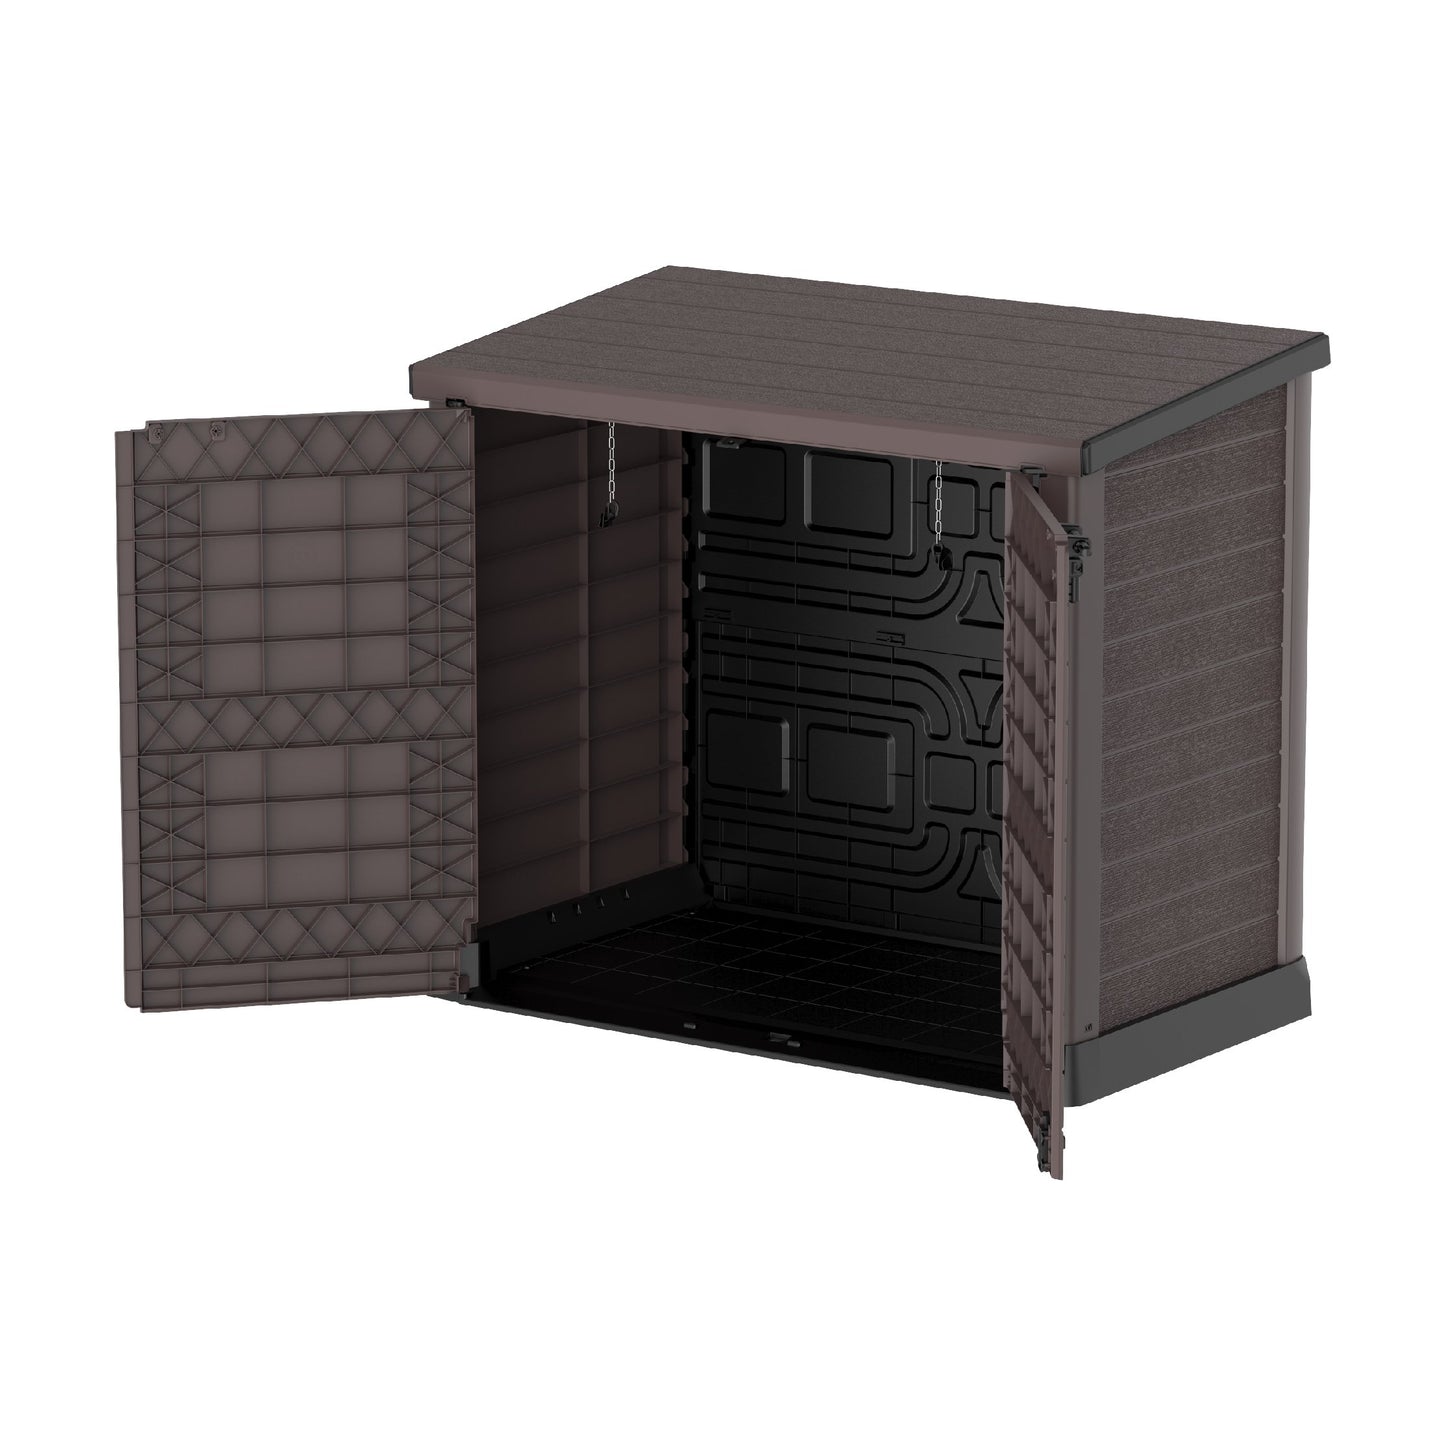 Small Storage Shed with Flat Lid Cosmoplast Saudi Arabia1200L Small Outdoor Storage Shed